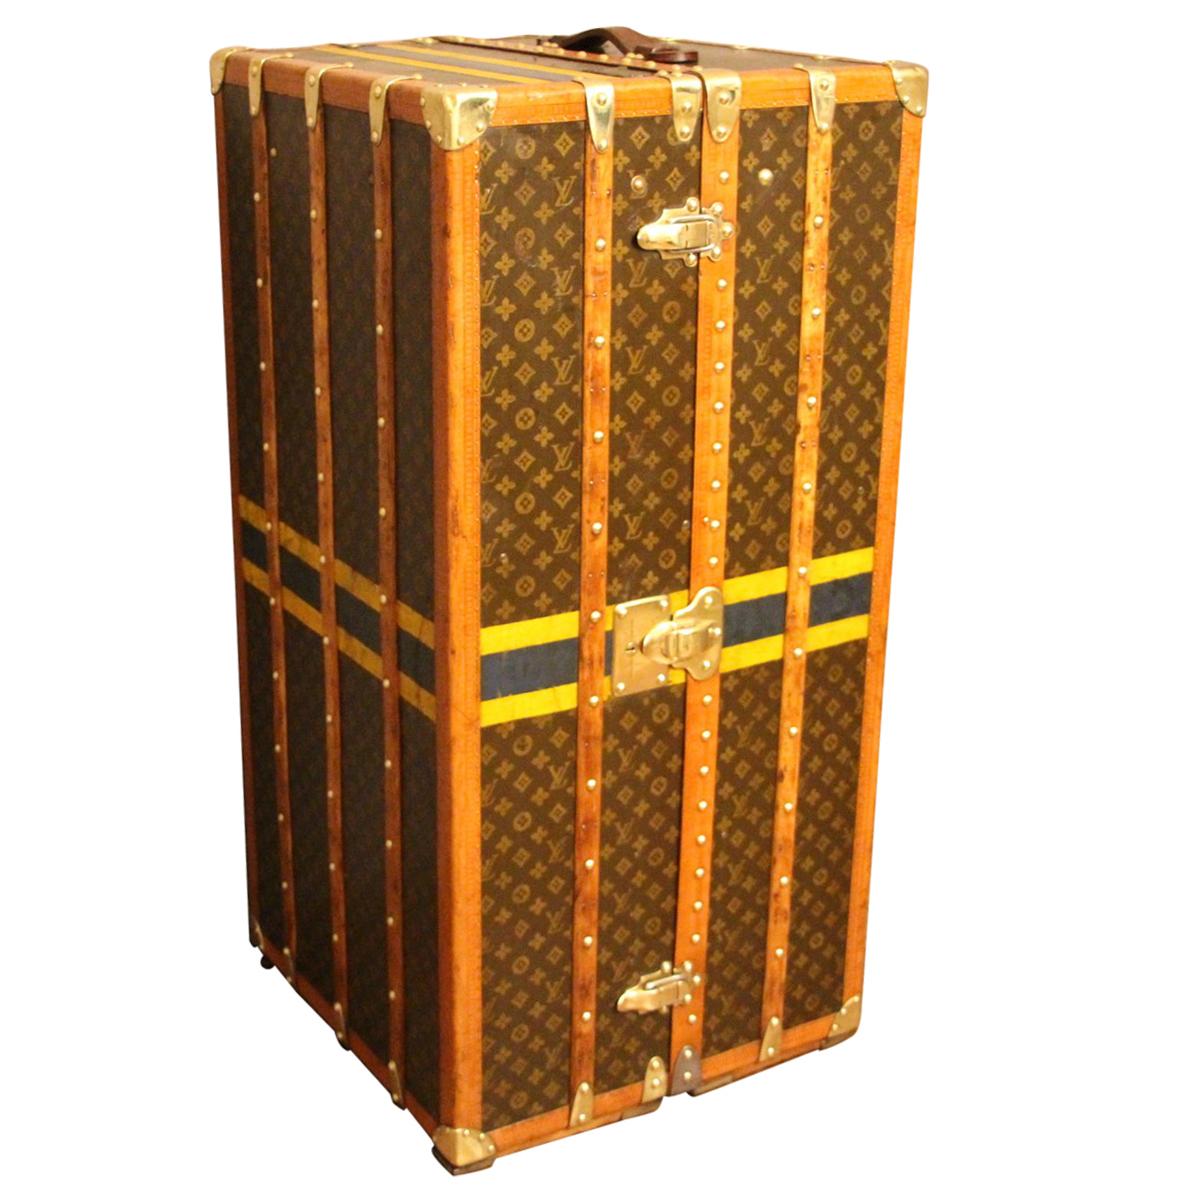 1930s Louis Vuitton Wardrobe Trunk in Monogram, Double Hanging Section